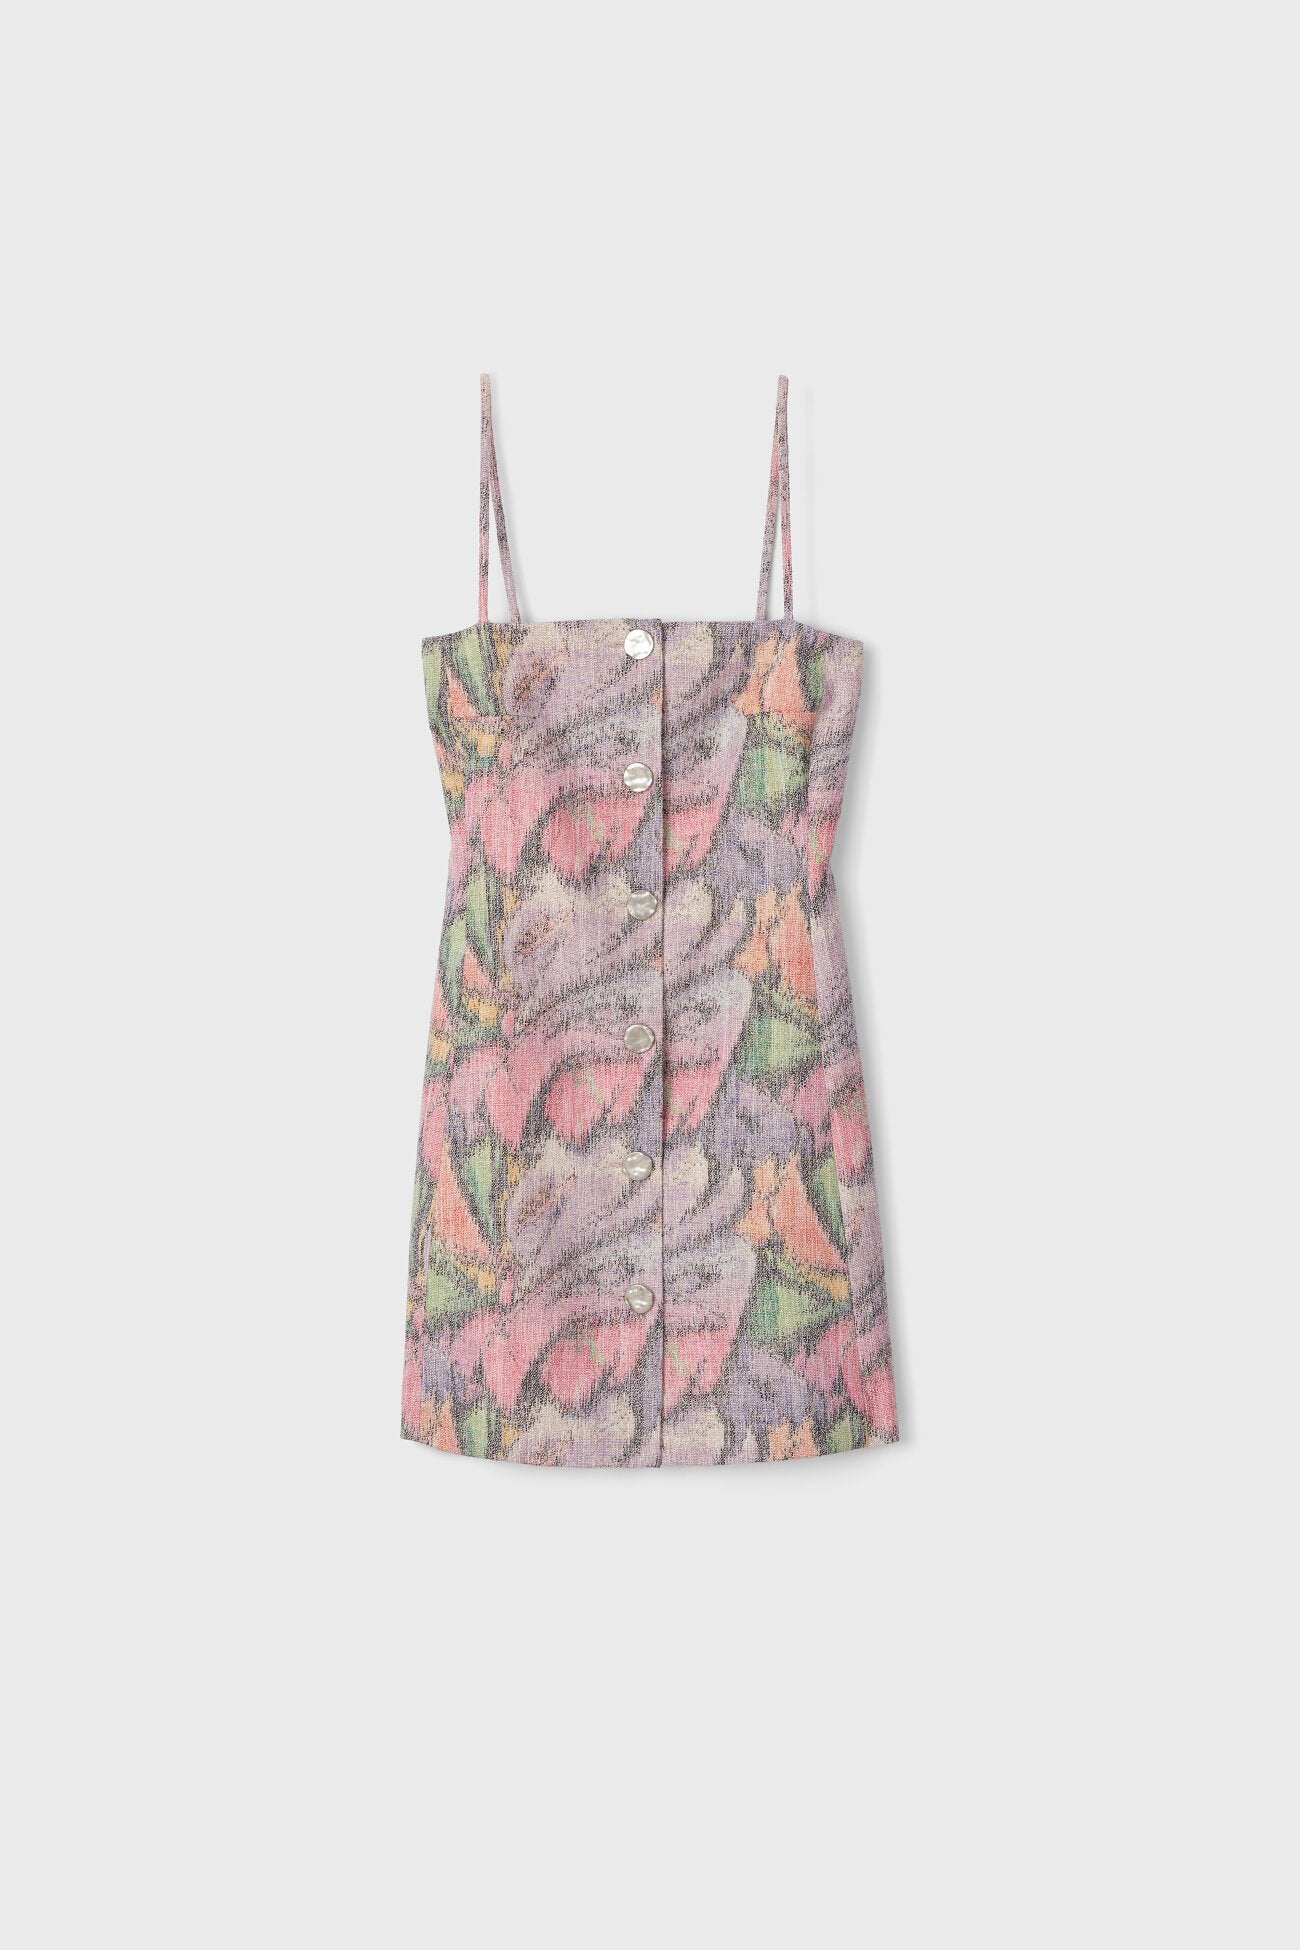 Willa Pastel Mini Dress by Rodebjer